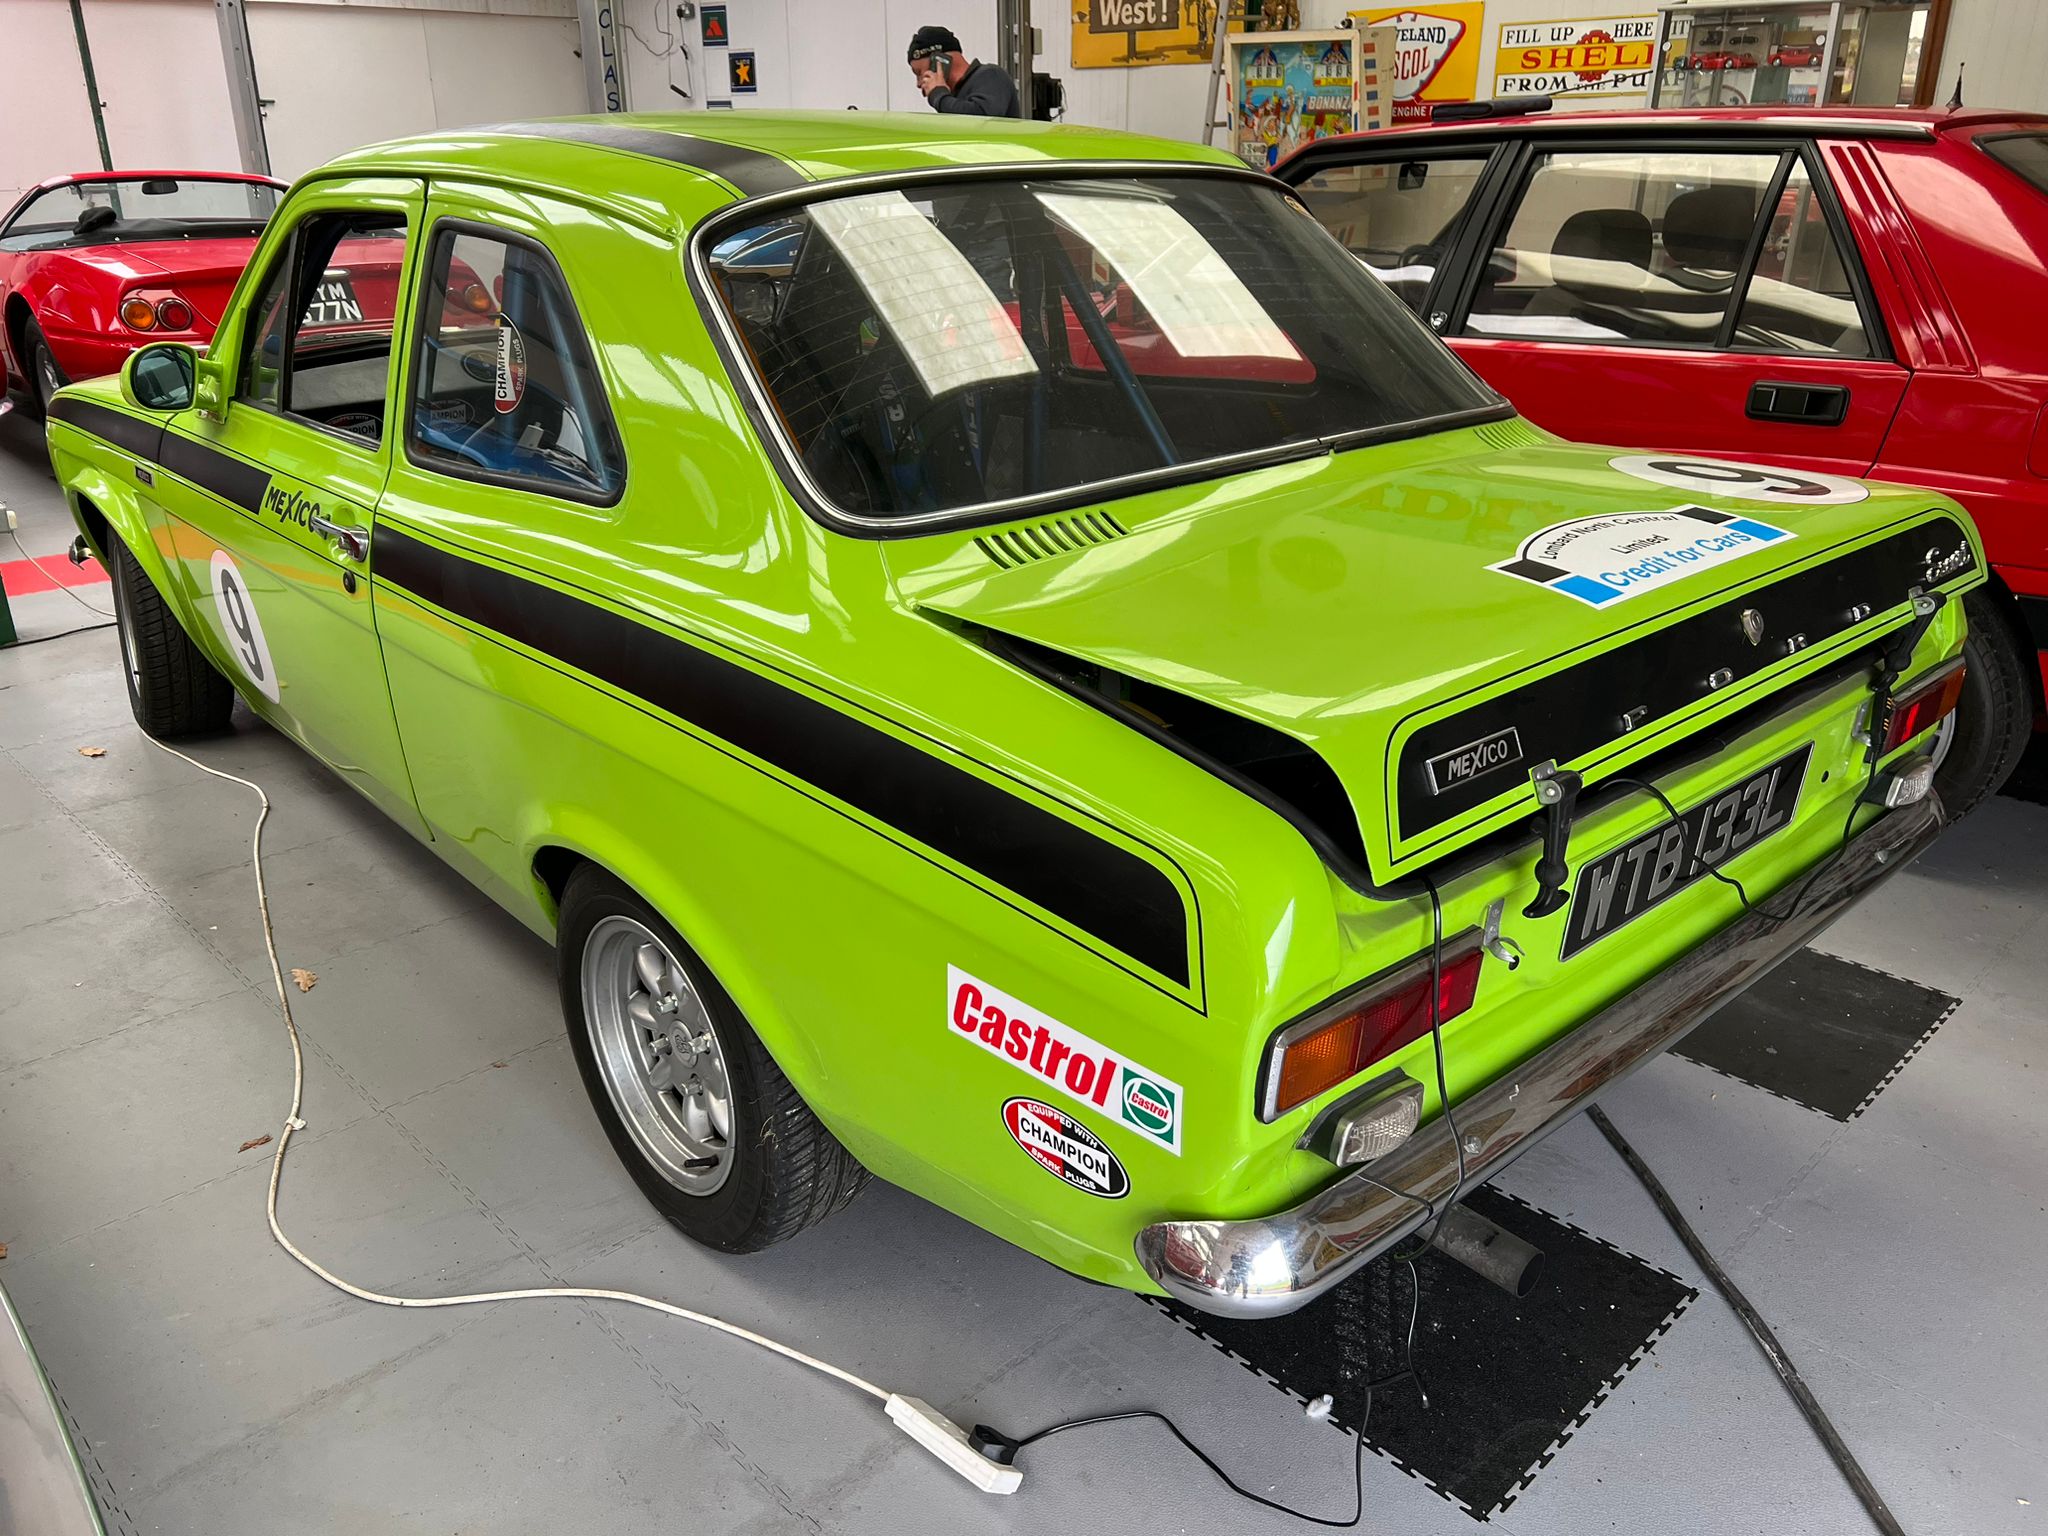 Ford Escort Mk1 X-Sport Mexico Competition Car 1973 - Image 3 of 18